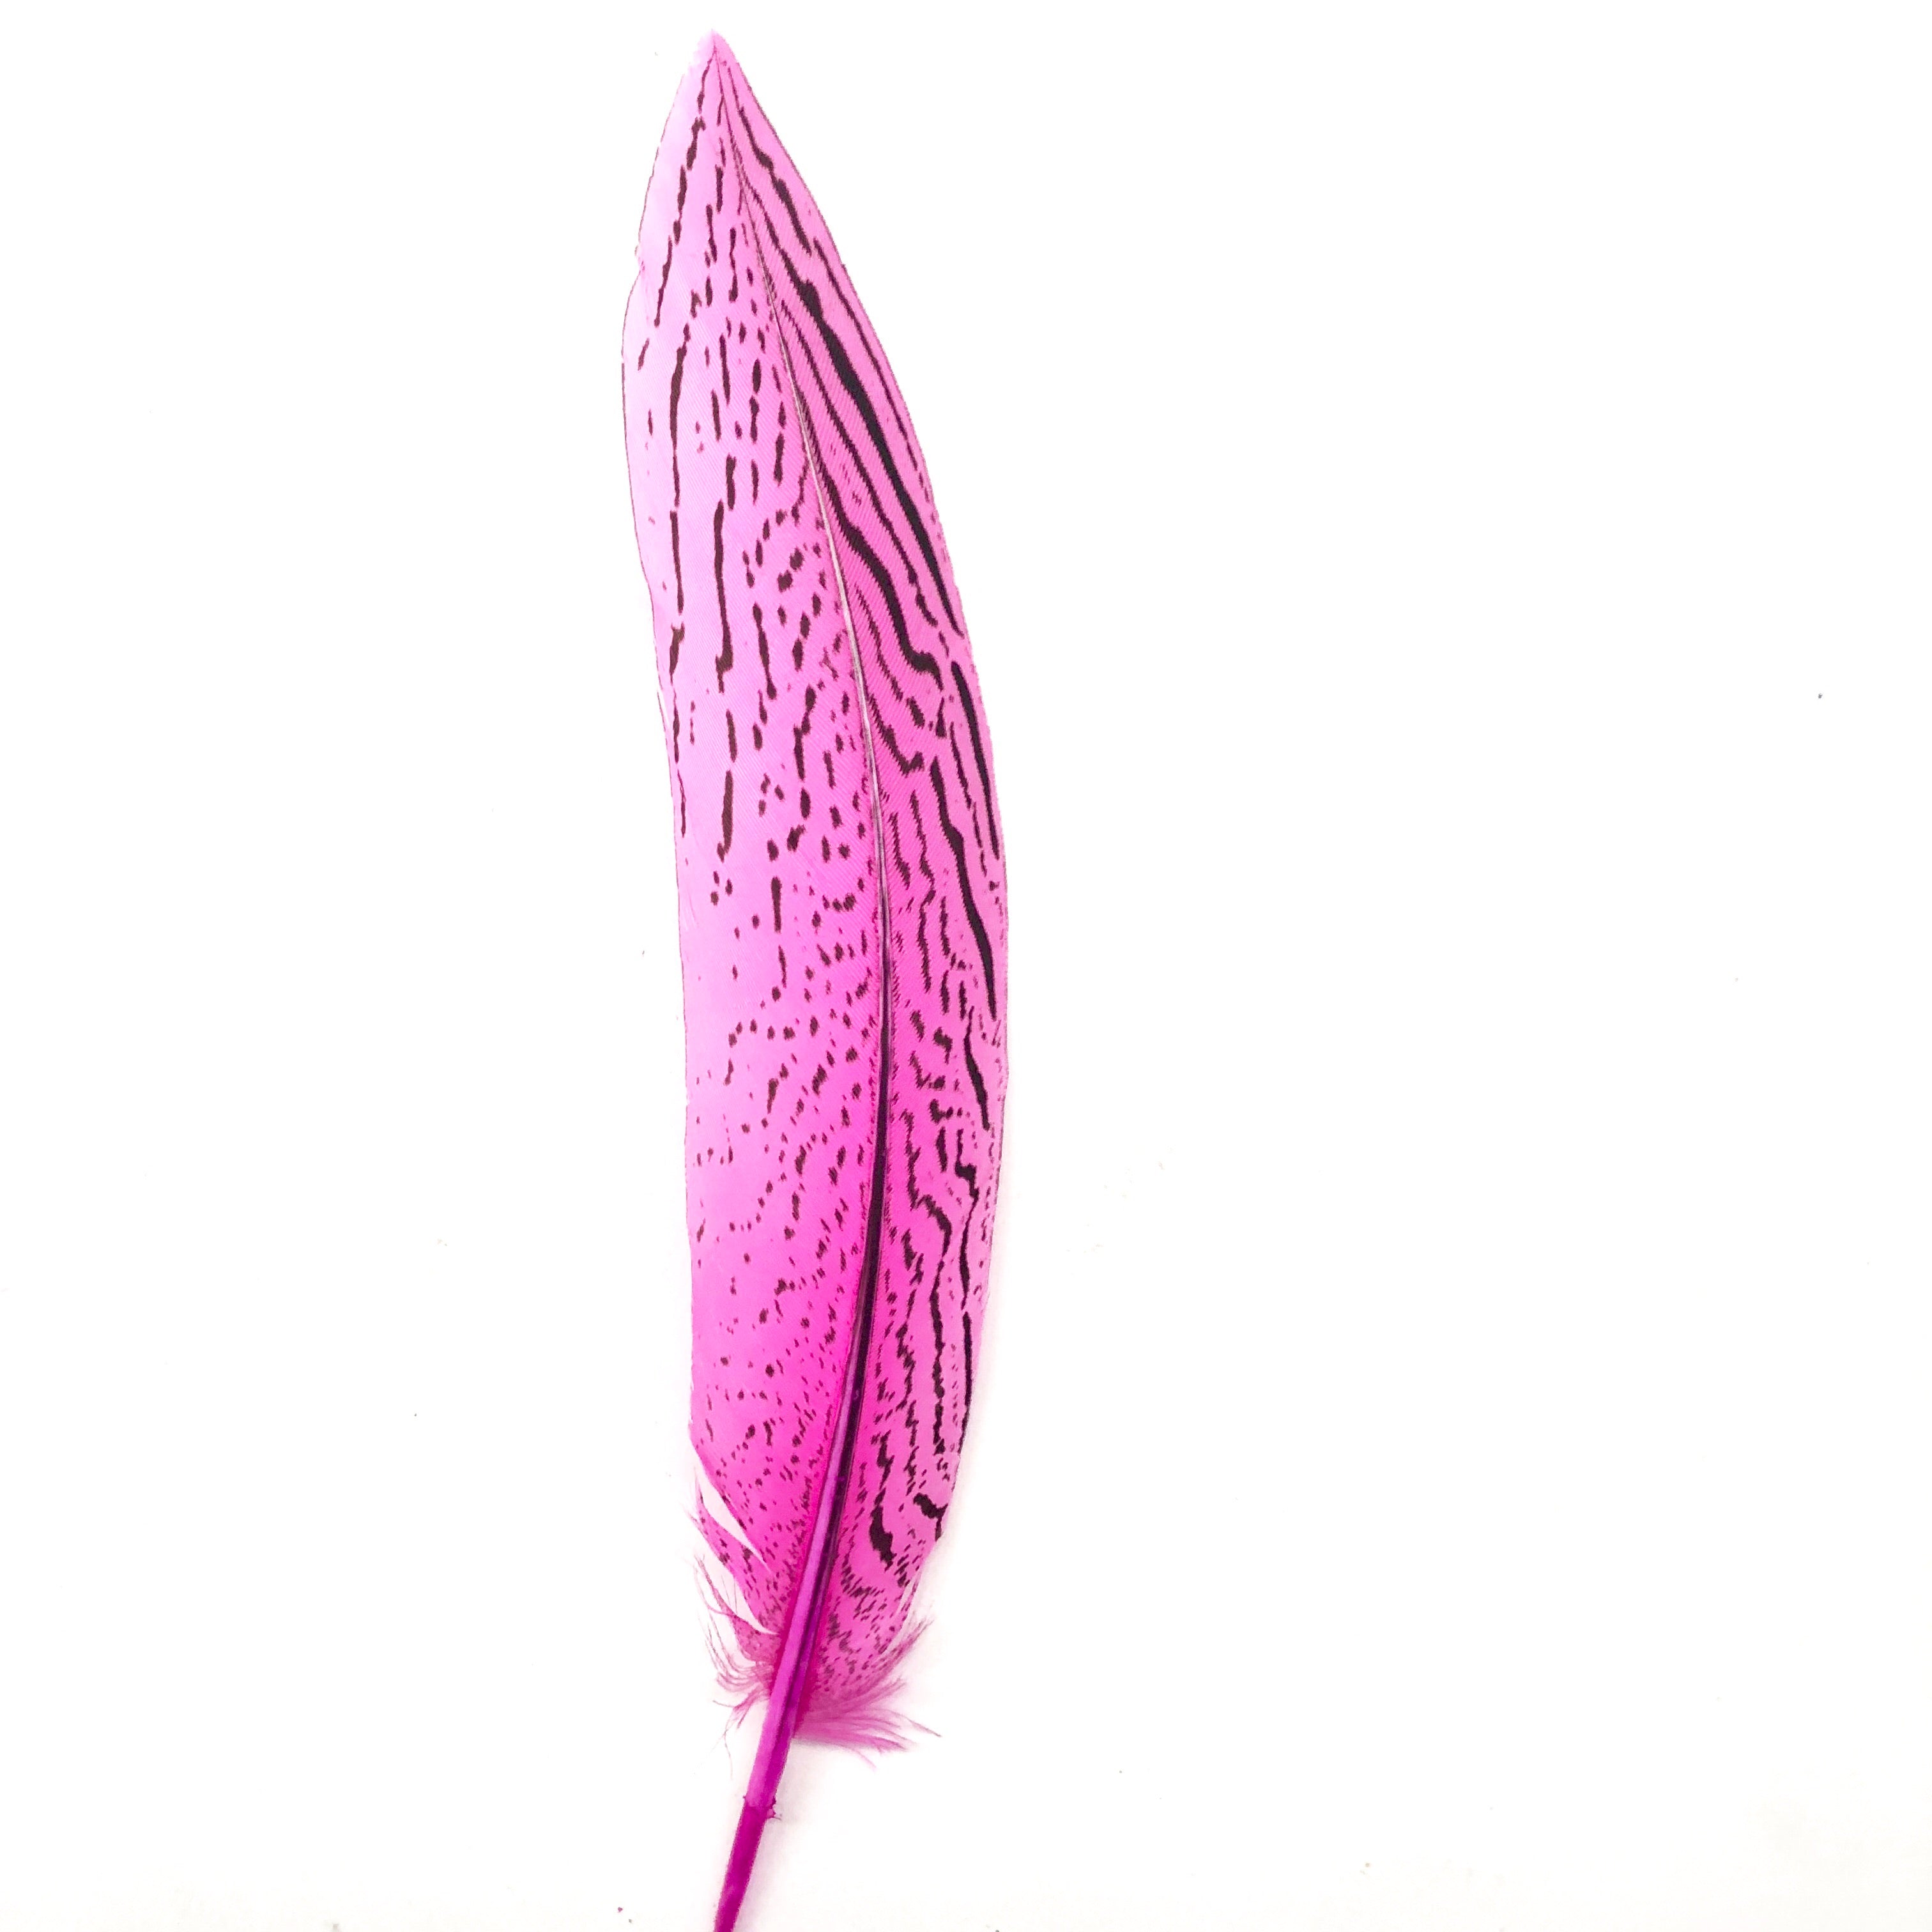 6" to 10" Silver Pheasant Tail Feather - Hot Pink